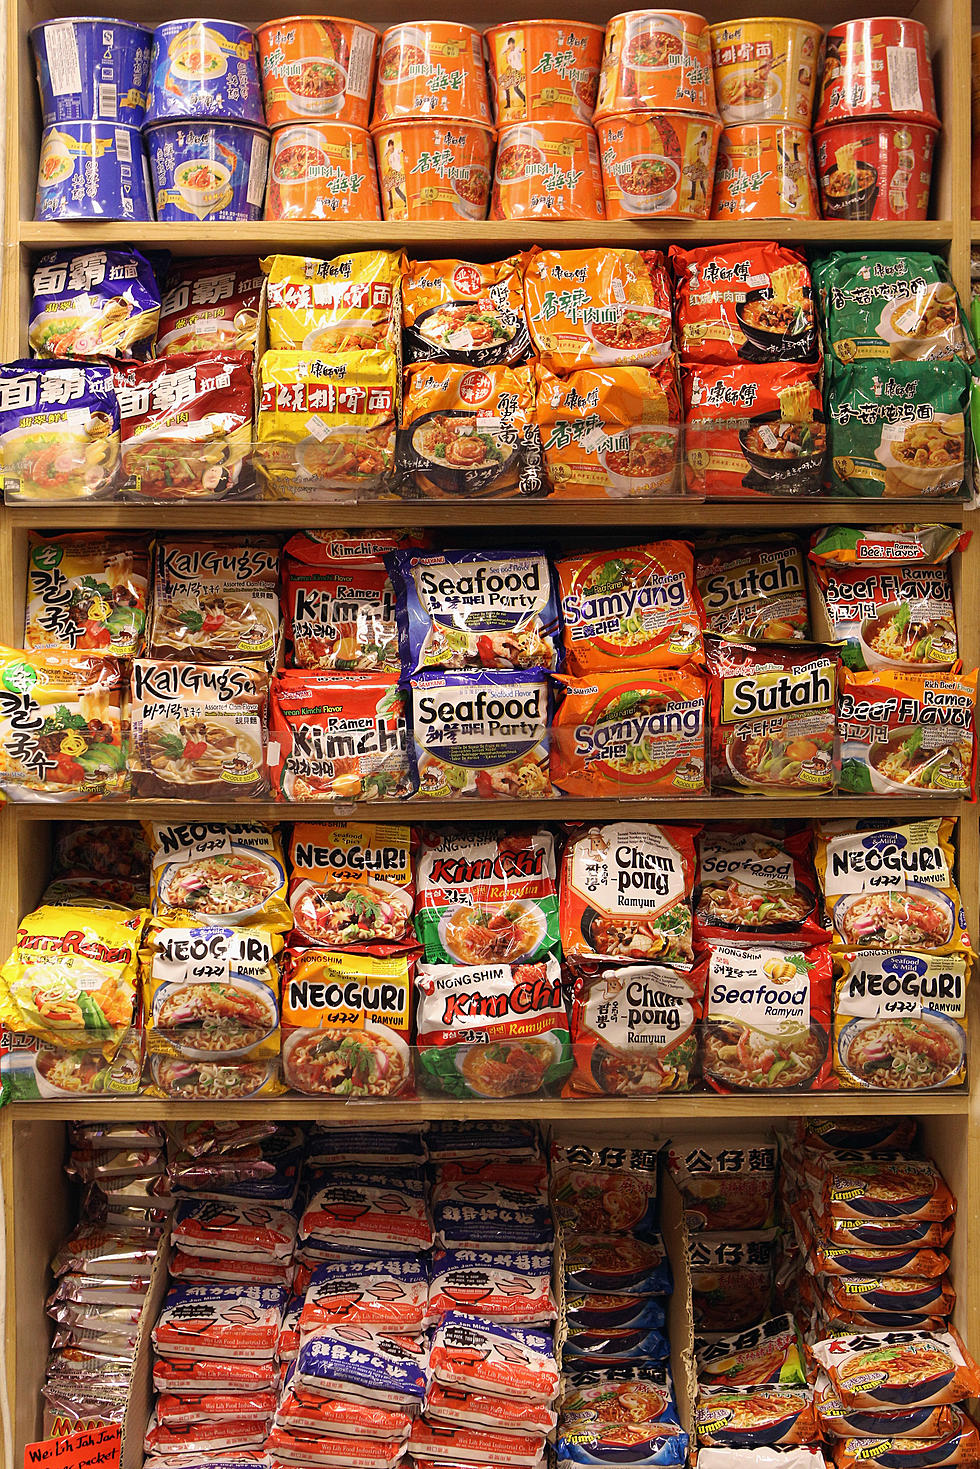 What Would You Do With $98K Worth of Ramen?